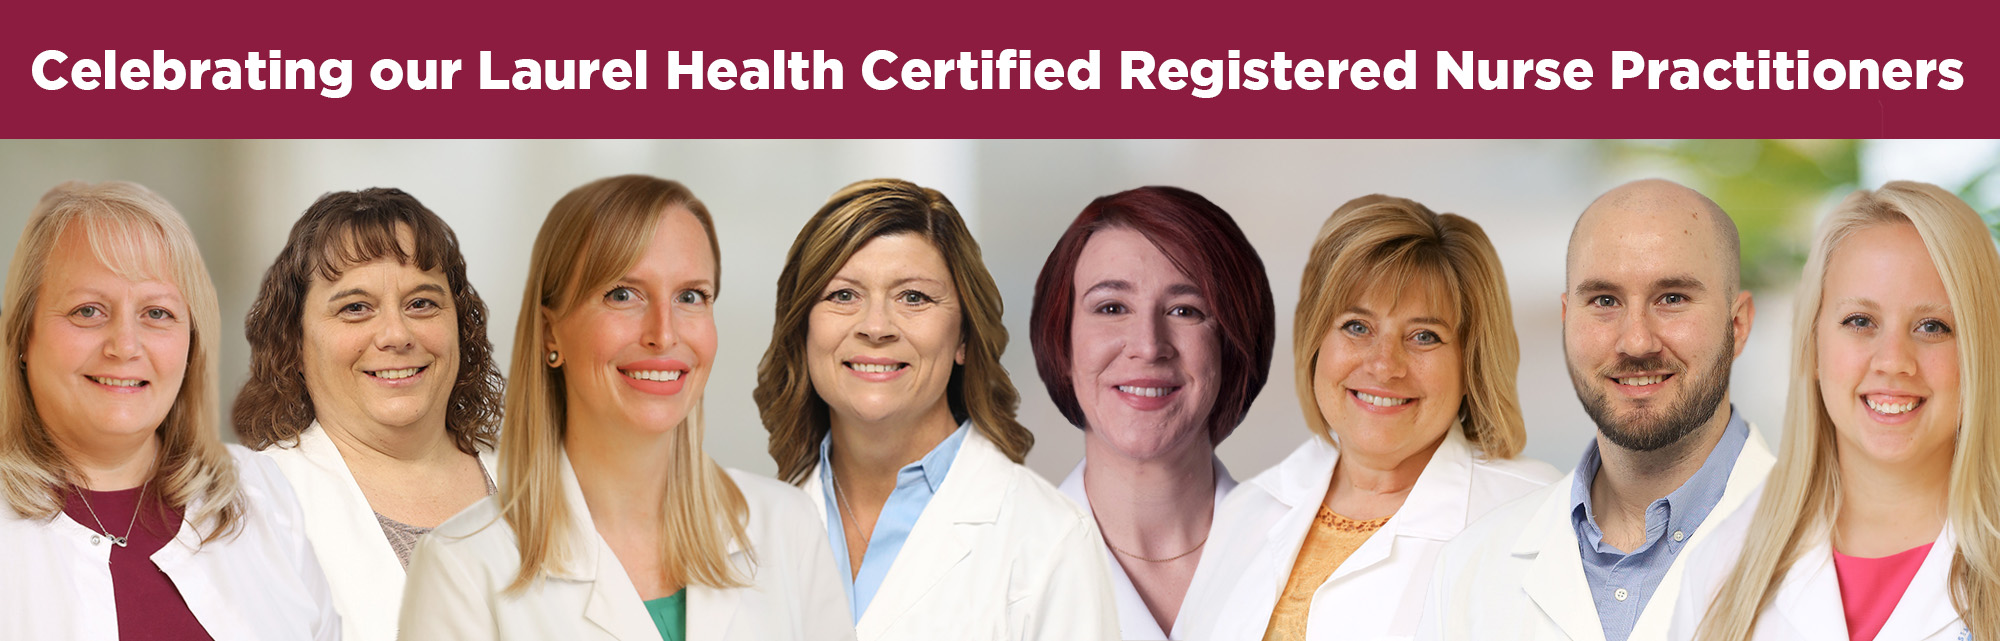 Celebrating Our Certified Registered Nurse Practitioners (CRNP)